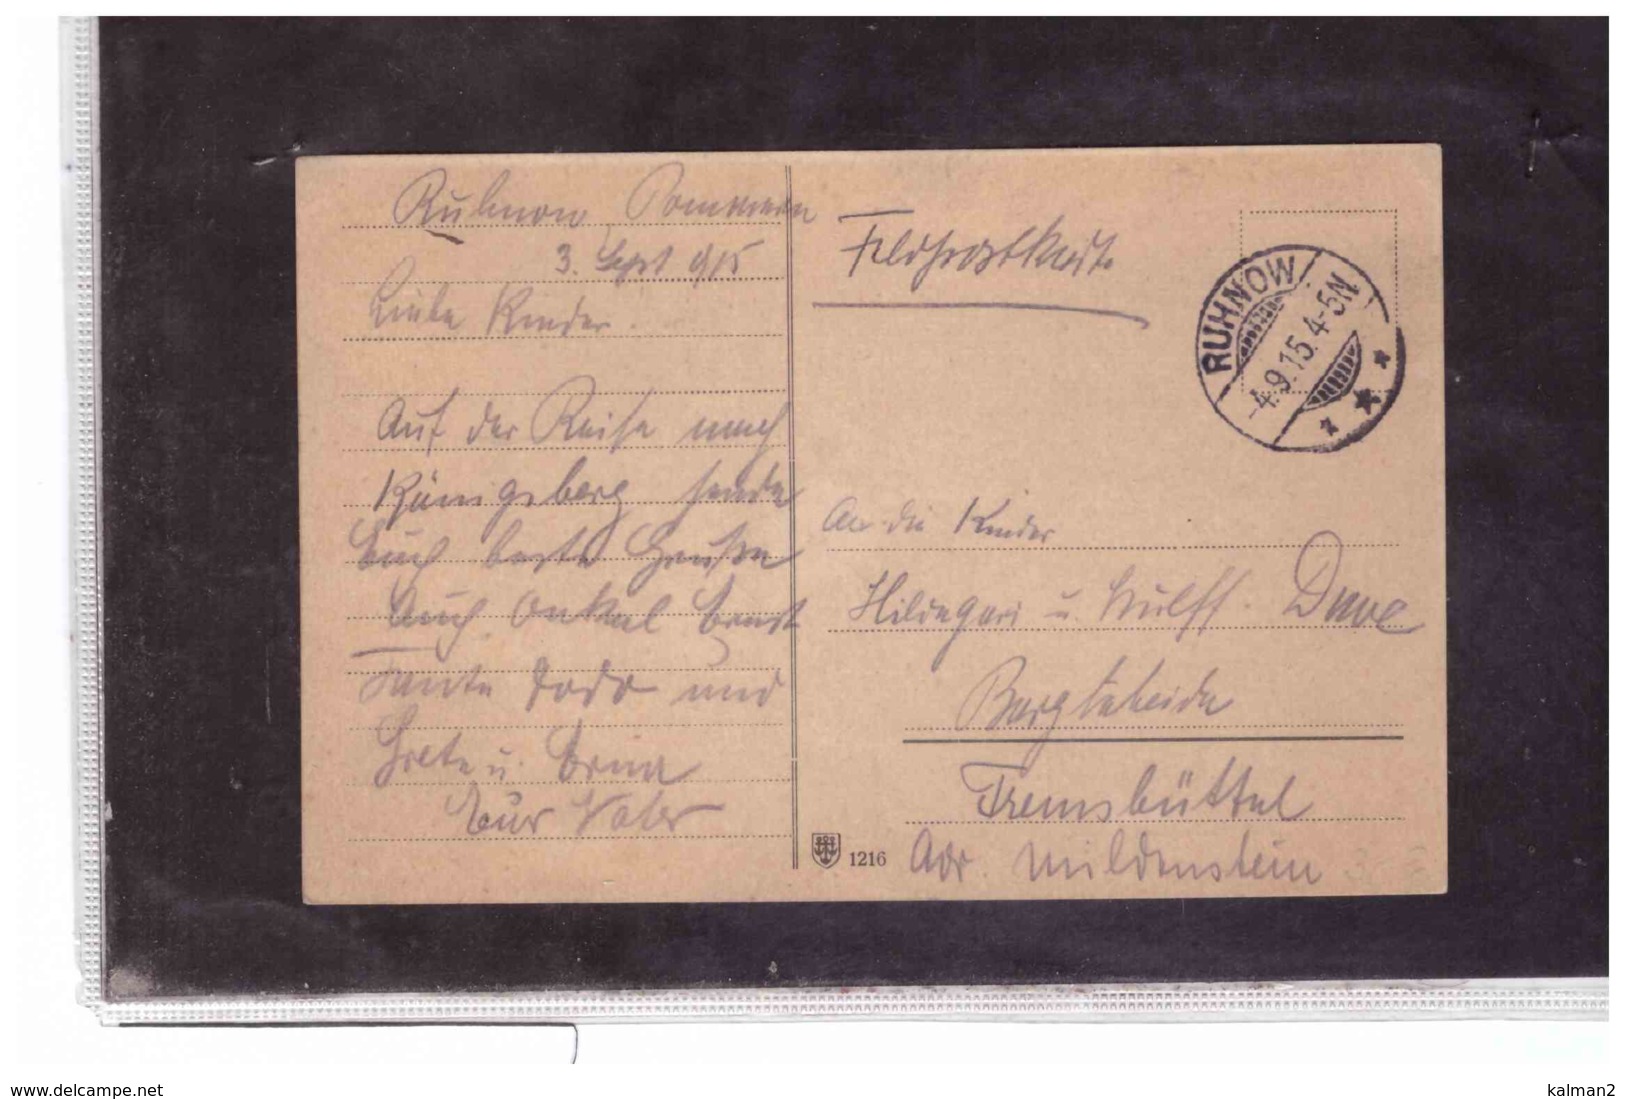 TEM12281  -  RUHNOW ( Now  Runowo In Poland )  4.9.1915  /   FELDPOST CARD - Covers & Documents